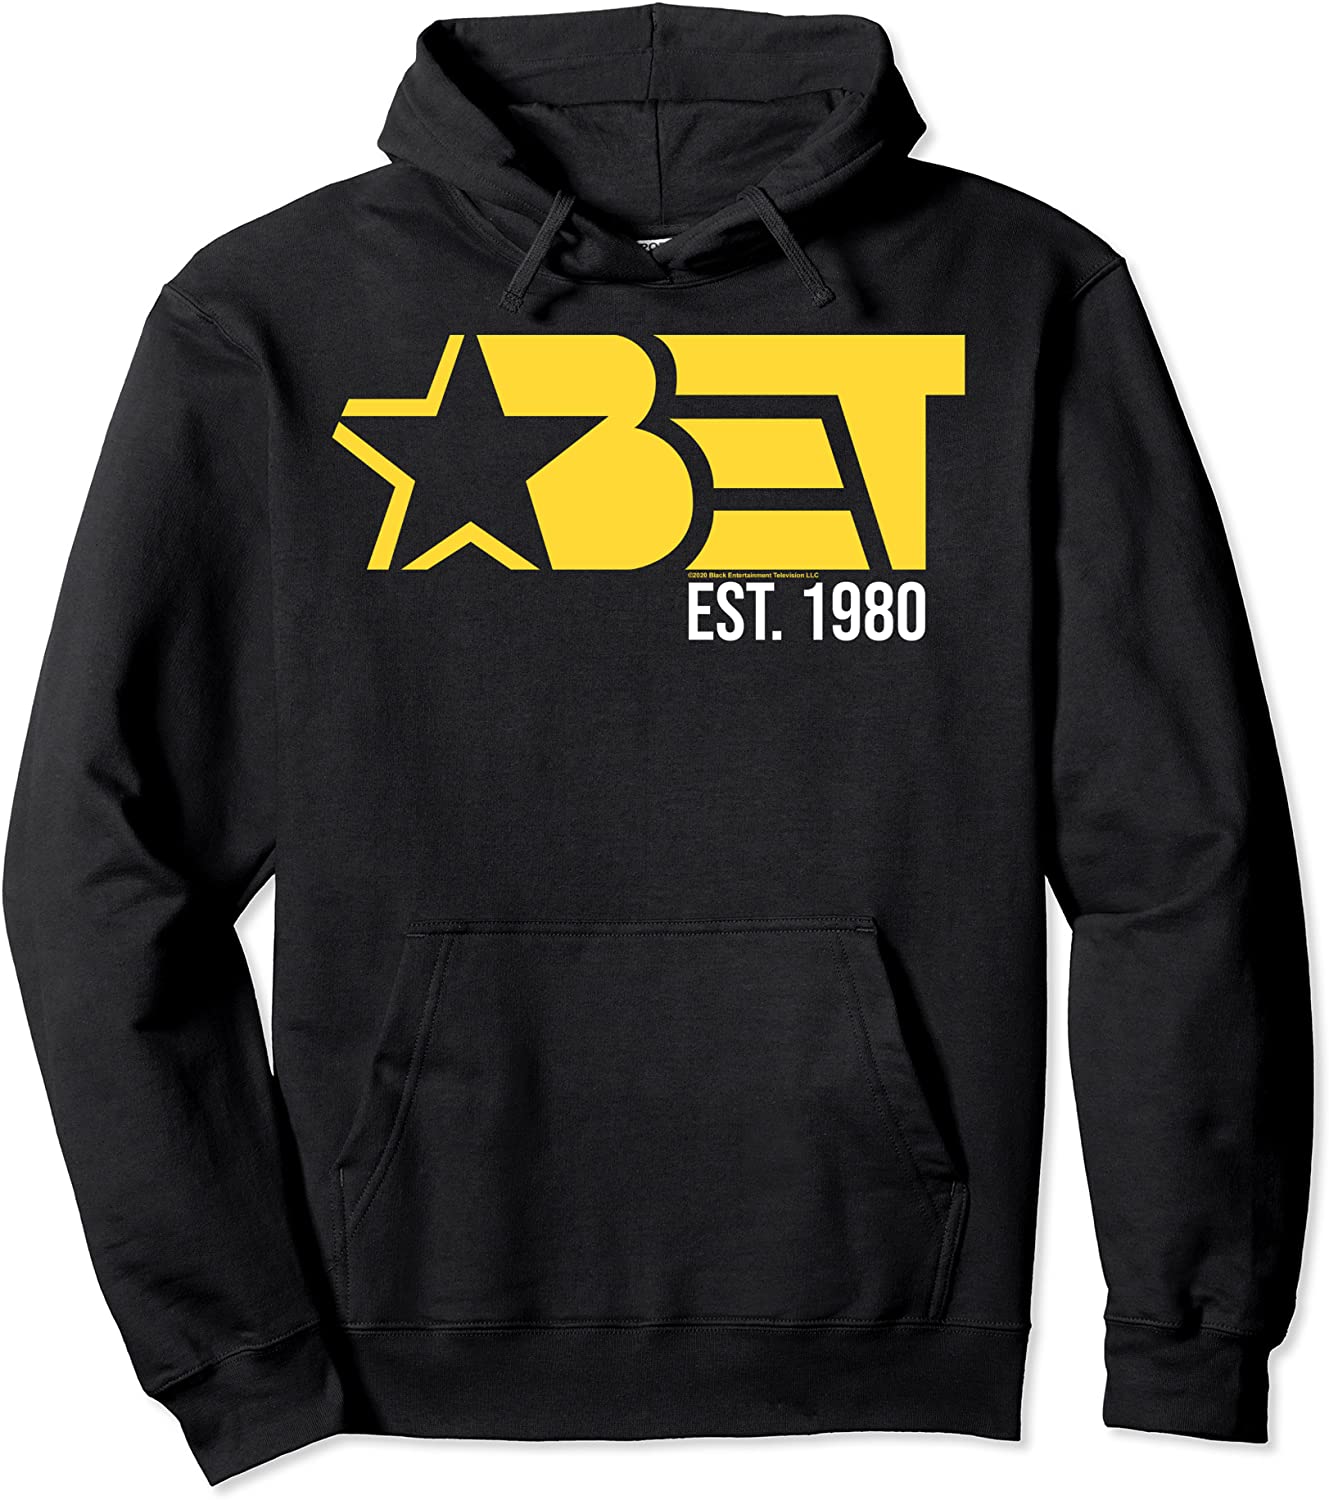 BET Black and Yellow Pullover Hoodie